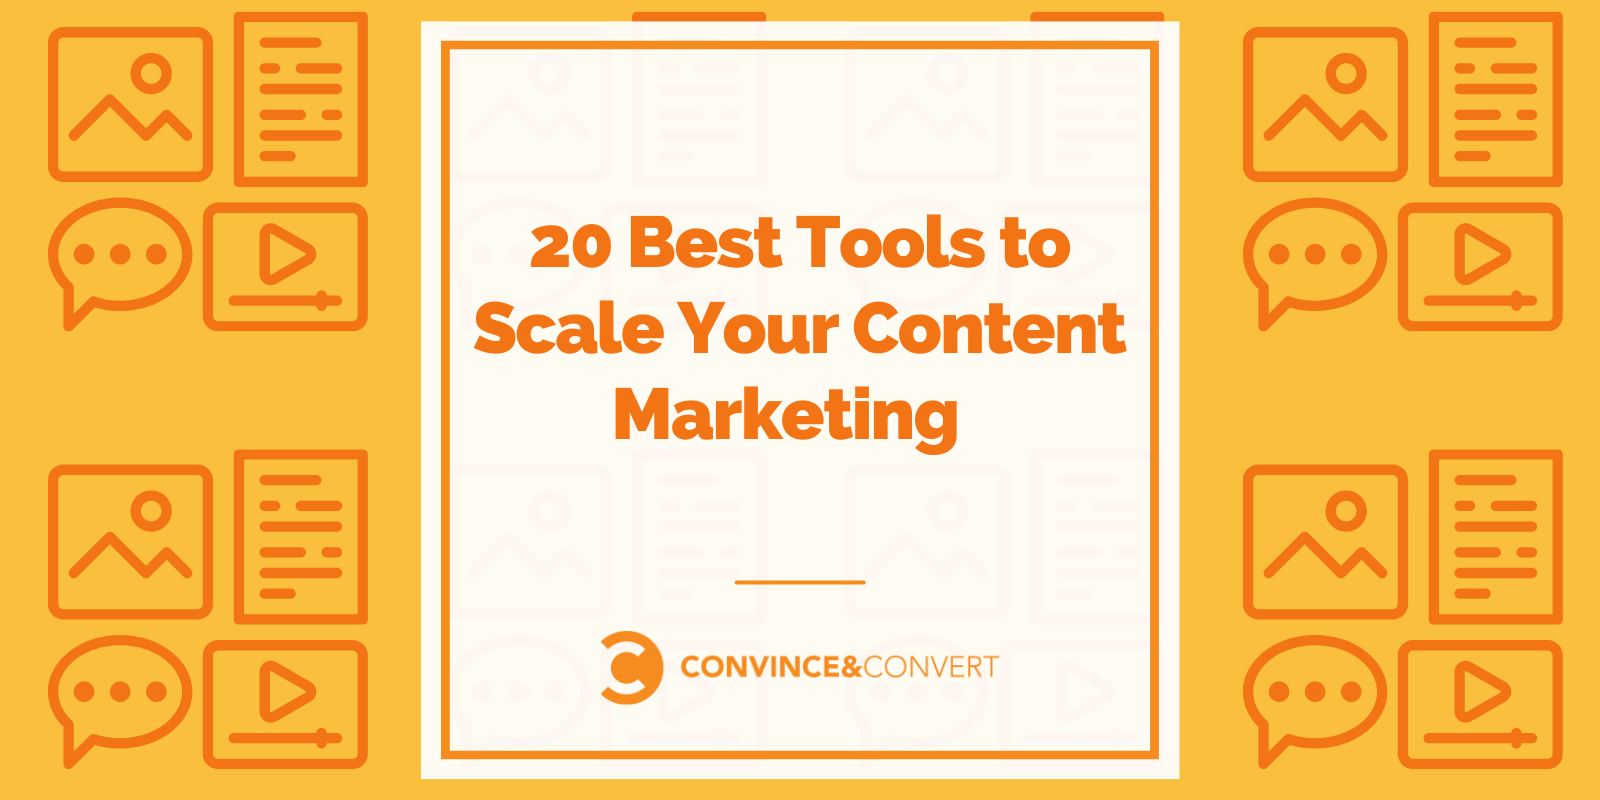 20 Best Tools to Scale Your Content Marketing